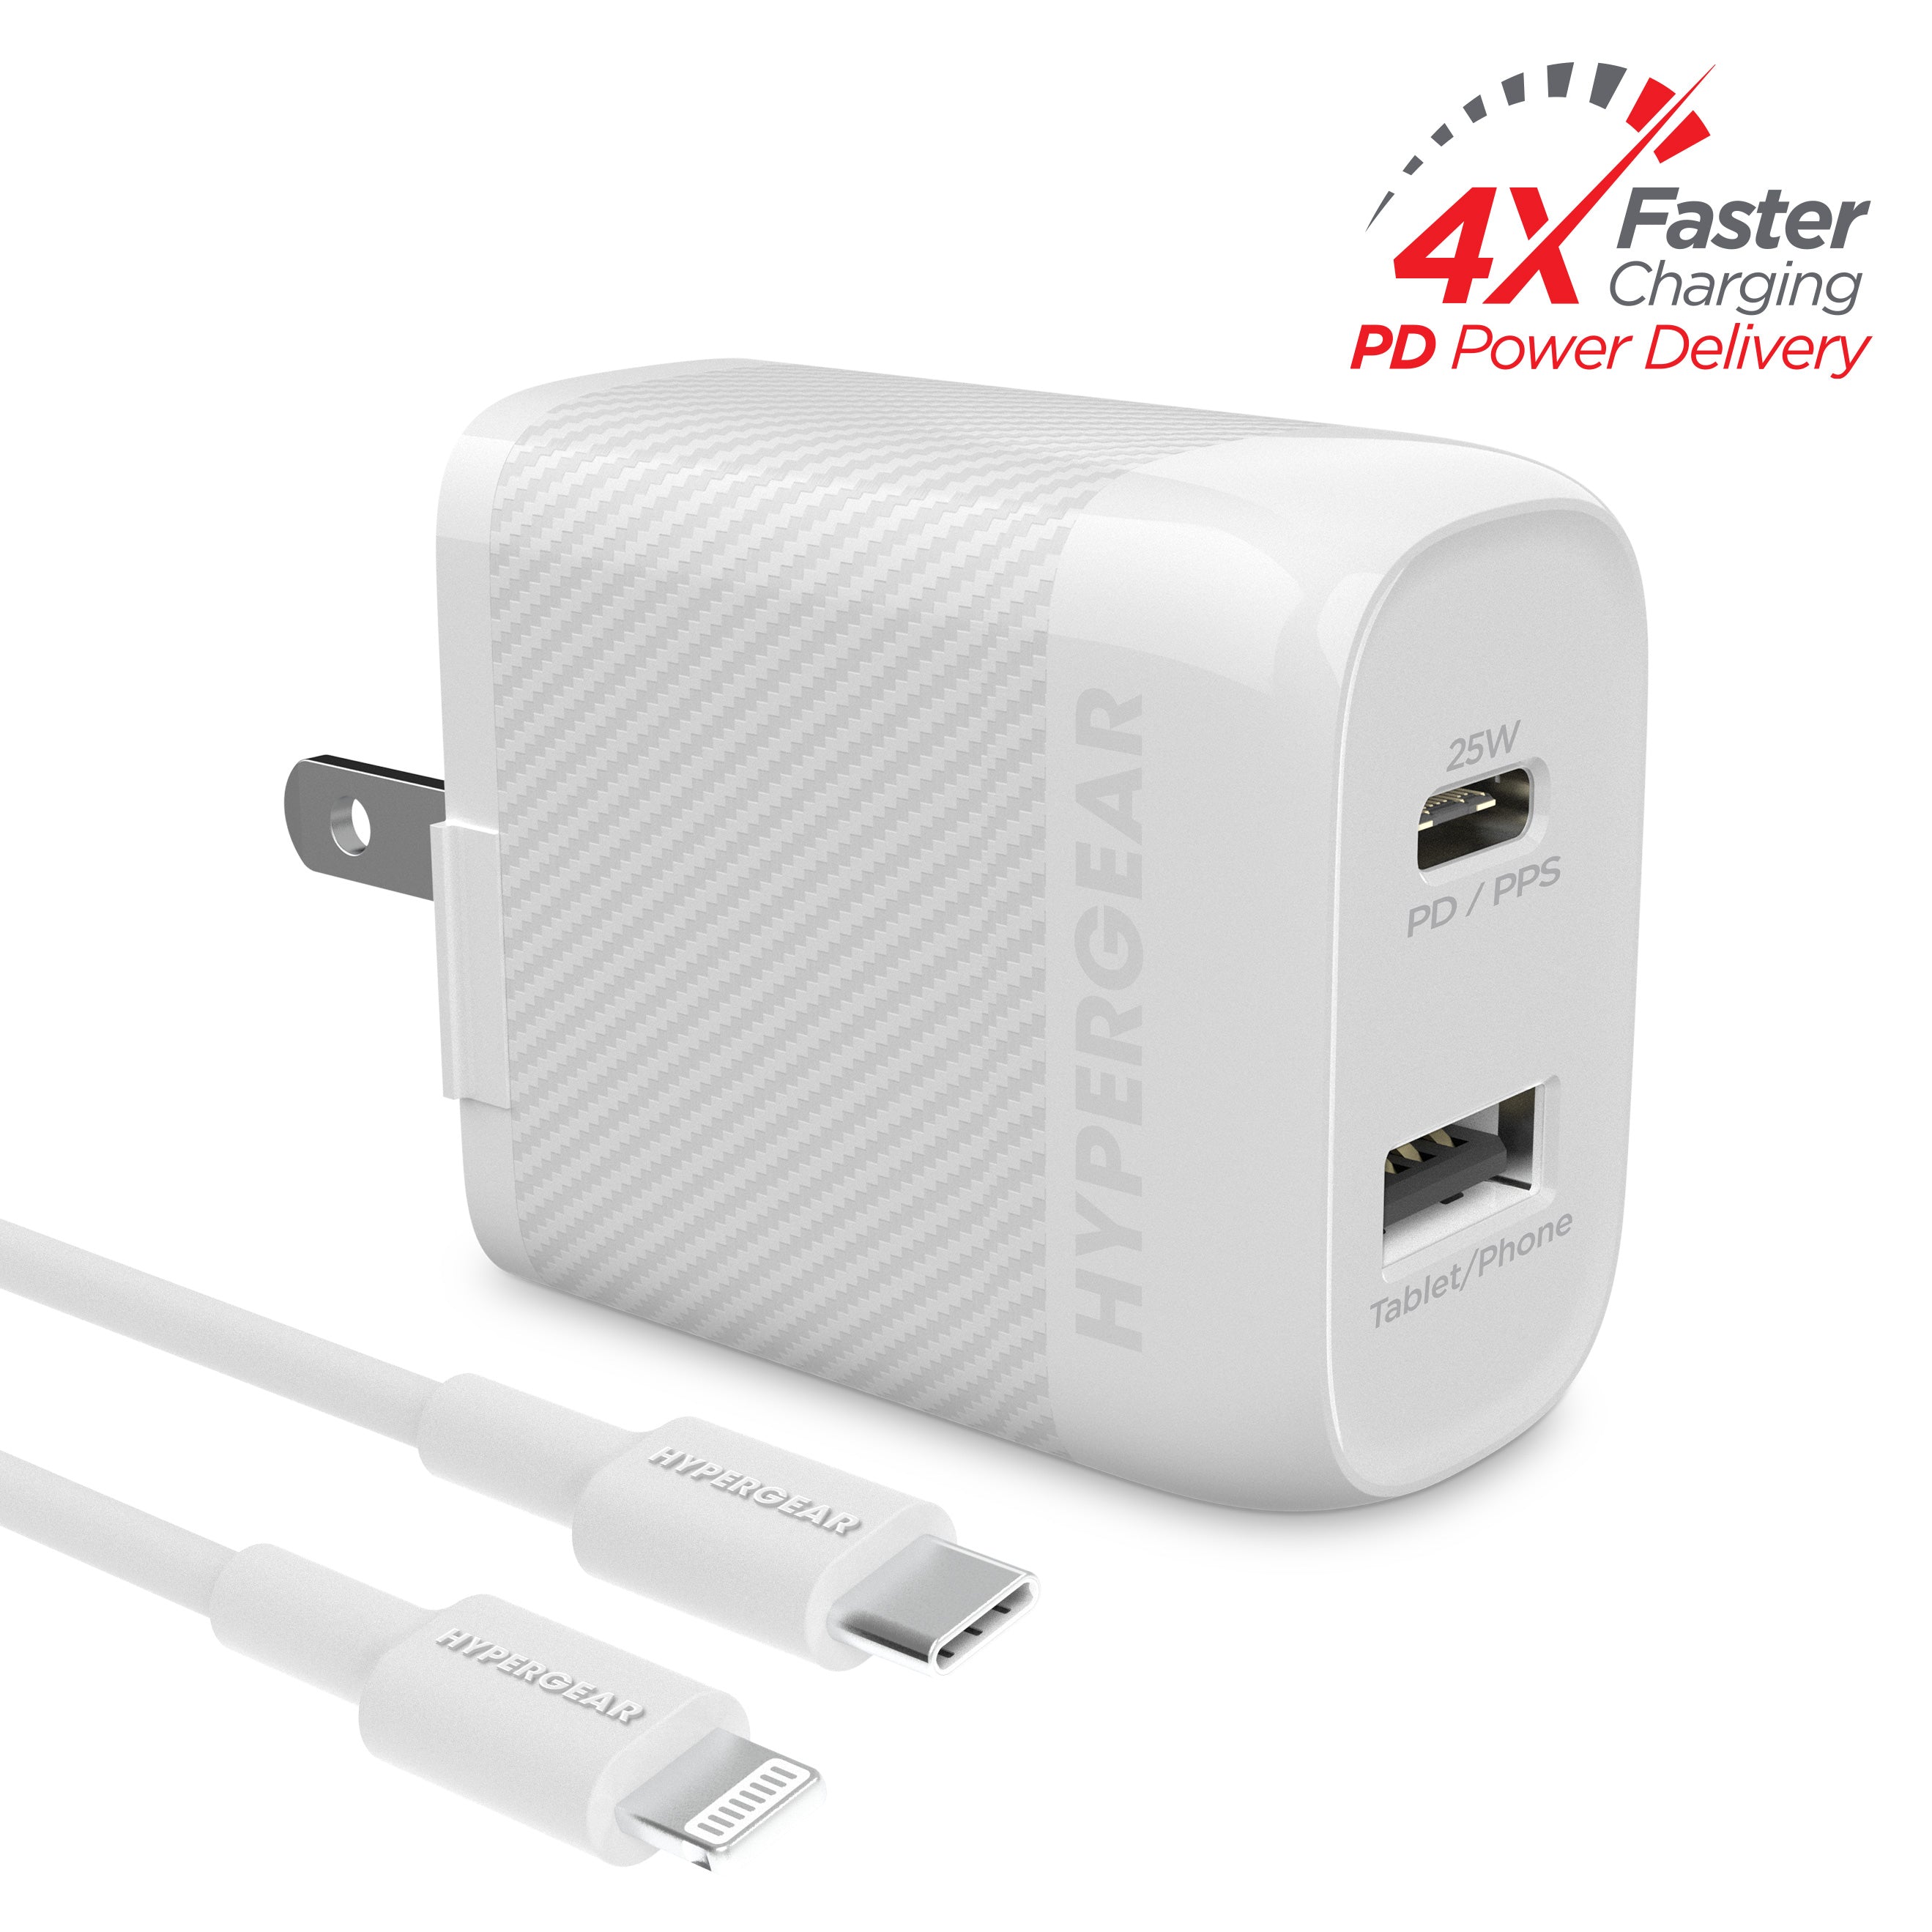 UGREEN USB C Charger 25W Support Type C PD Fast Charging Portable